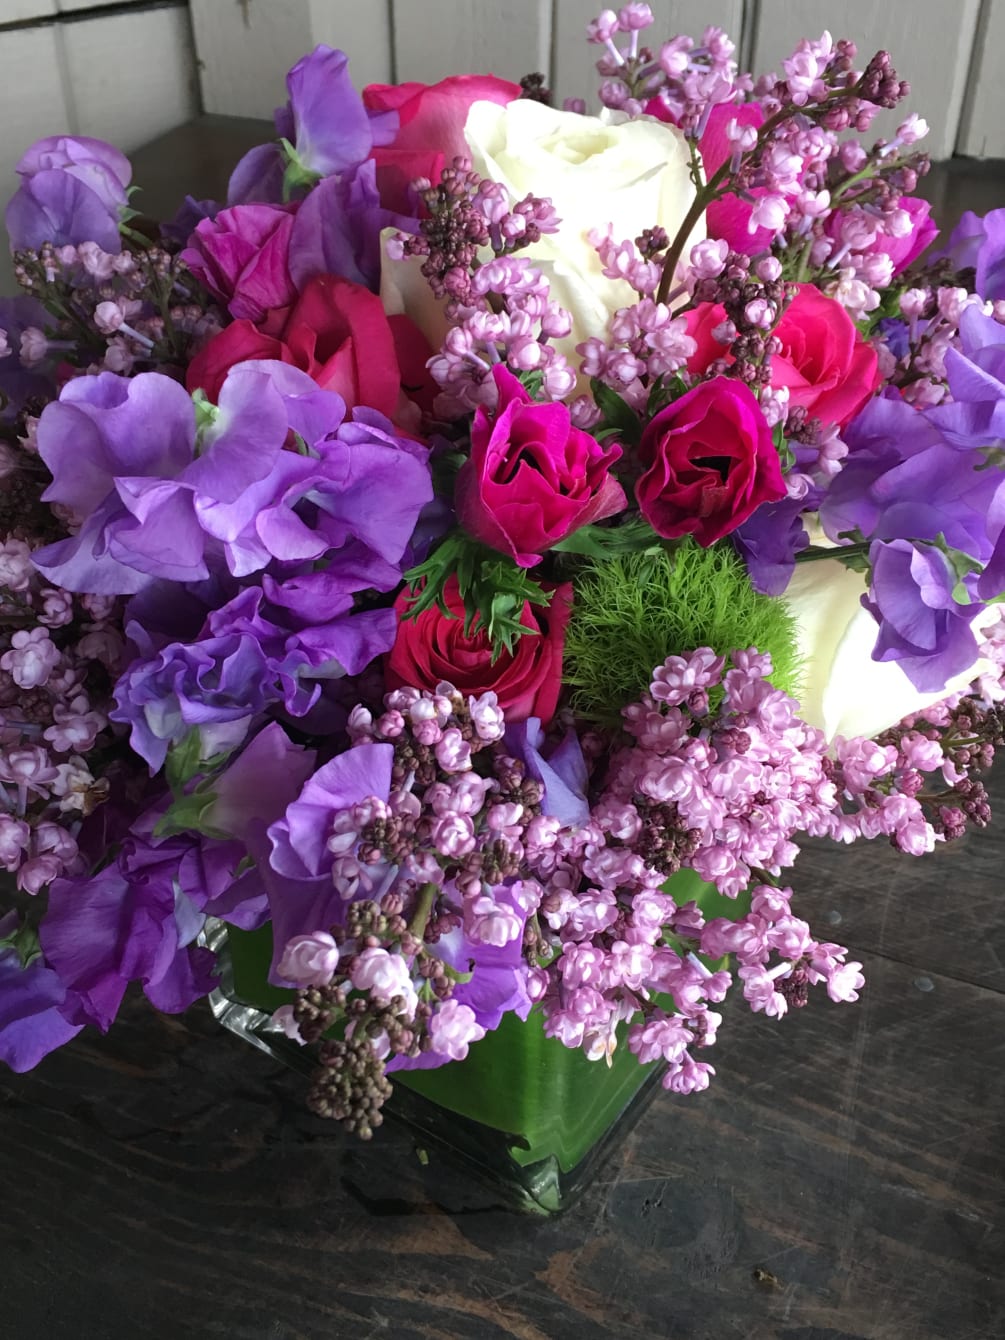 A beautiful spring mix of sweet peas, lilacs, anemones, roses, dianthus wrapped